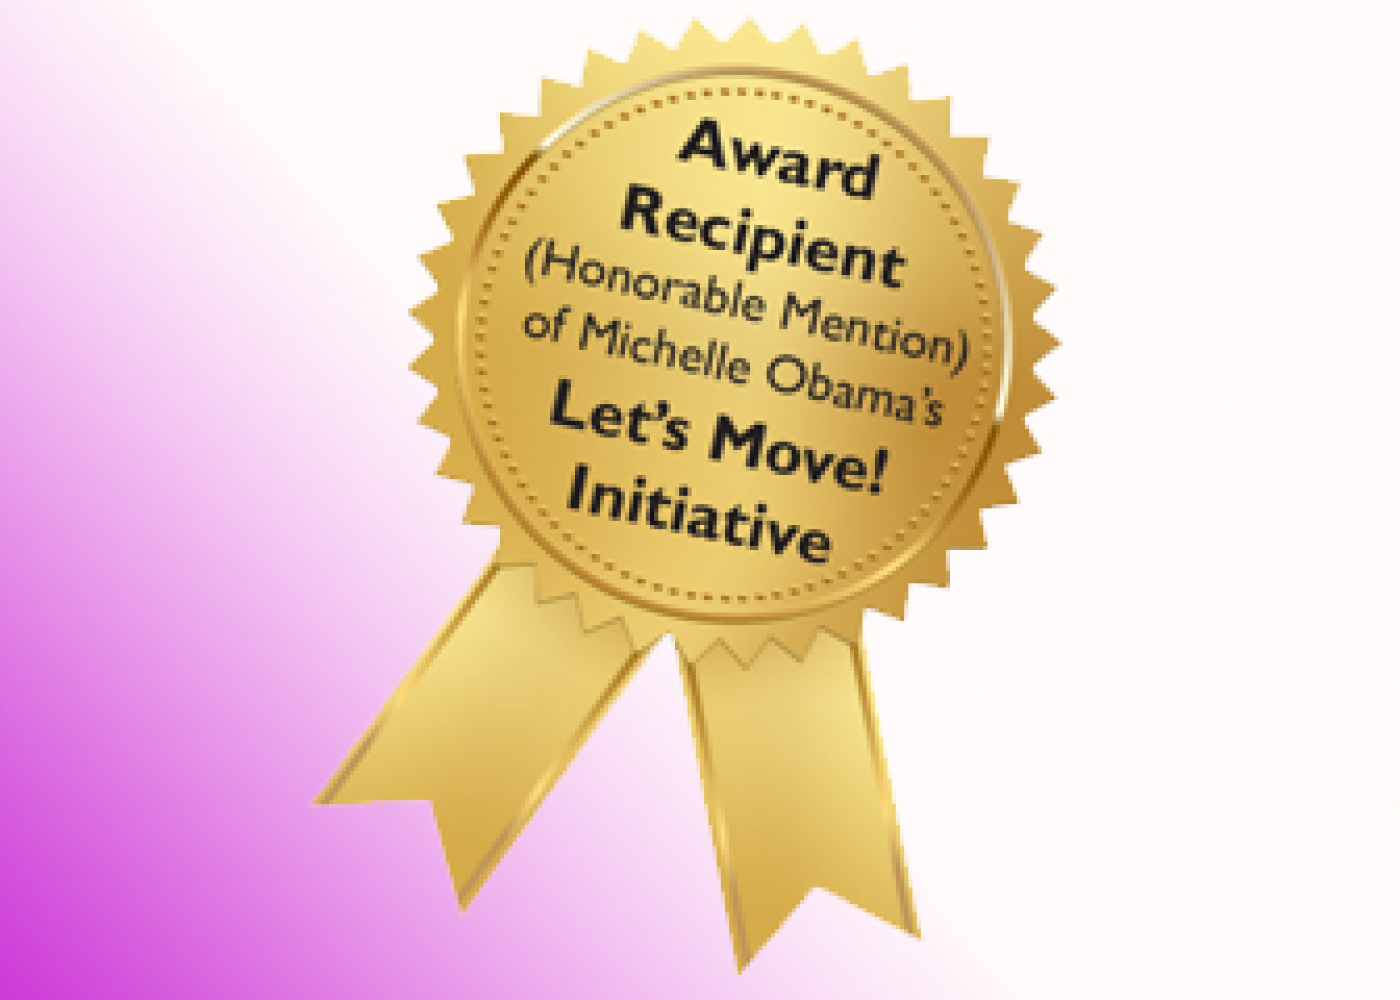 Award Recipient: Honorable Mention of Michelle Obama's Let's Move! Initiatve